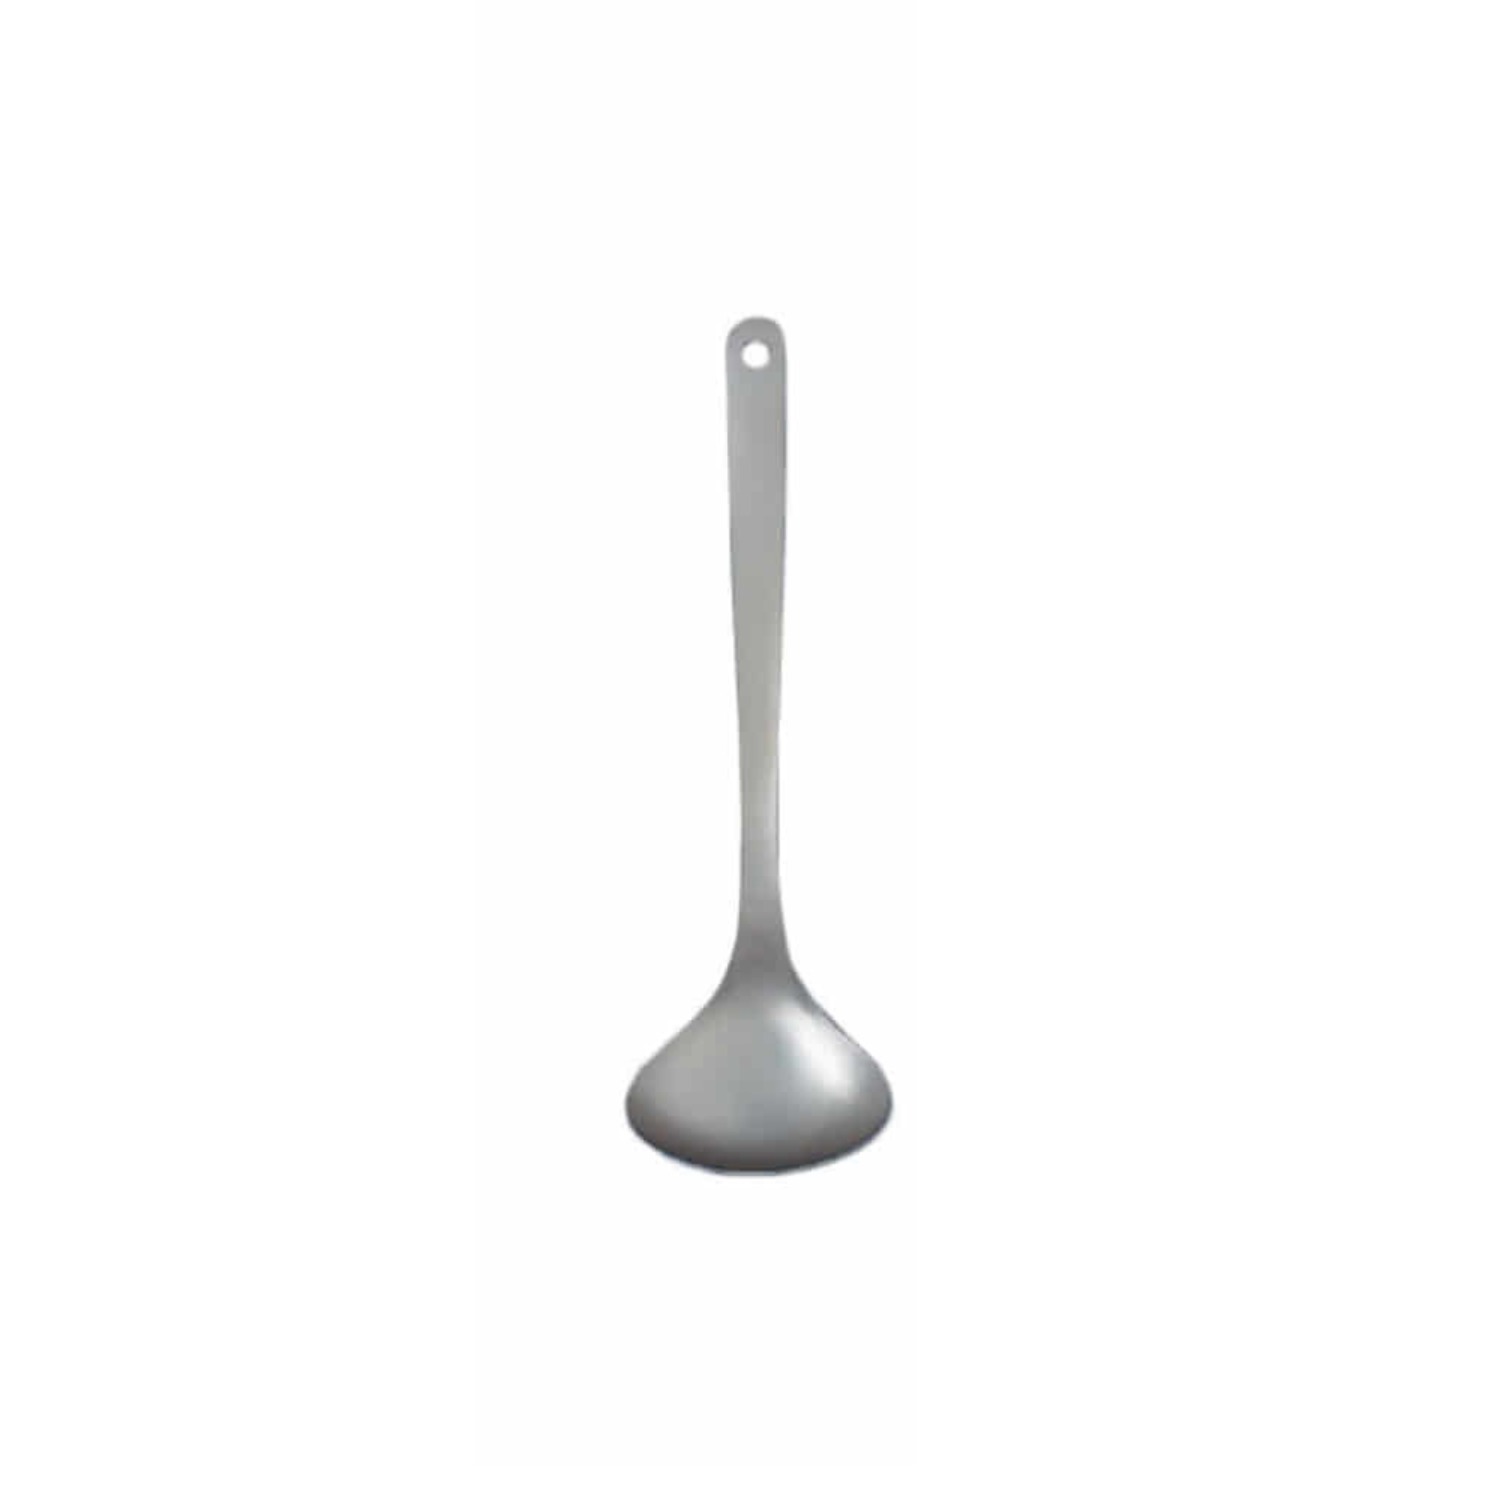 ﻿Stainless Steel Kitchen Tools - Ladle